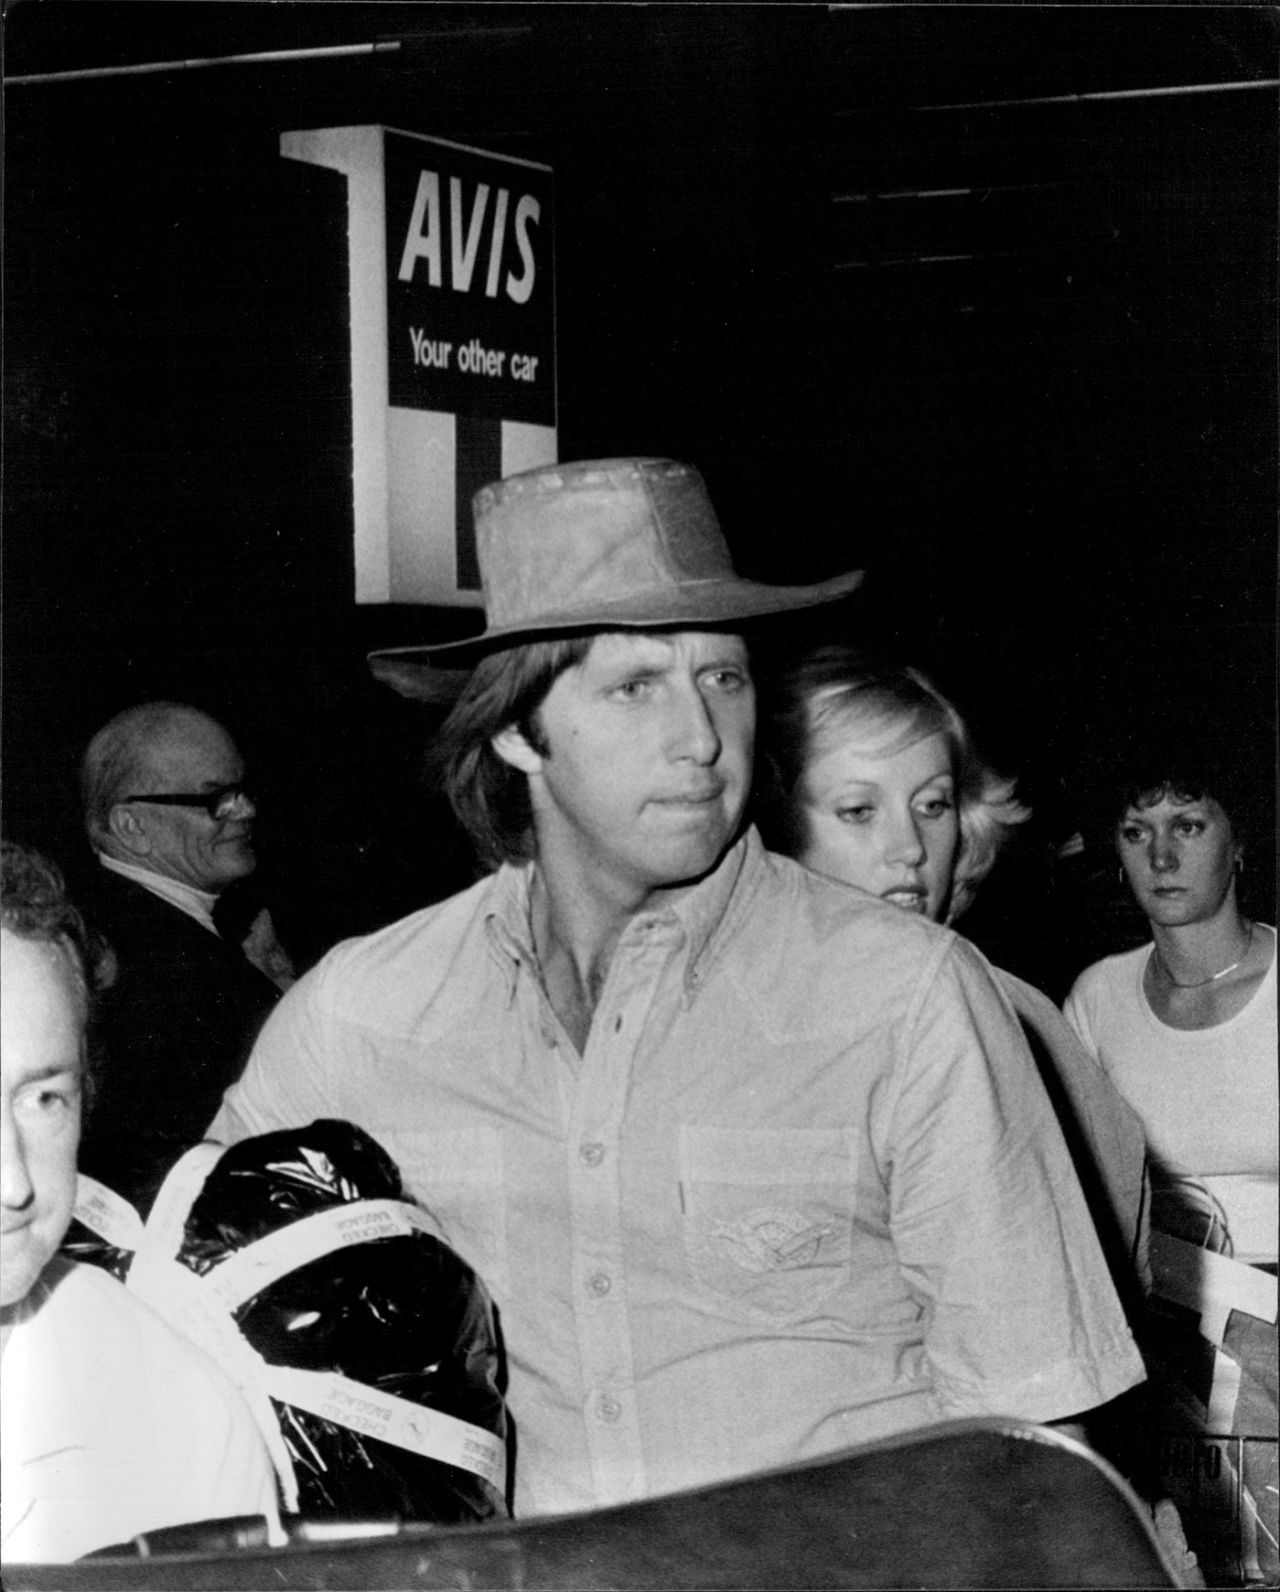 Jeff Thomson arrives home from the Ashes tour, September 4, 1977